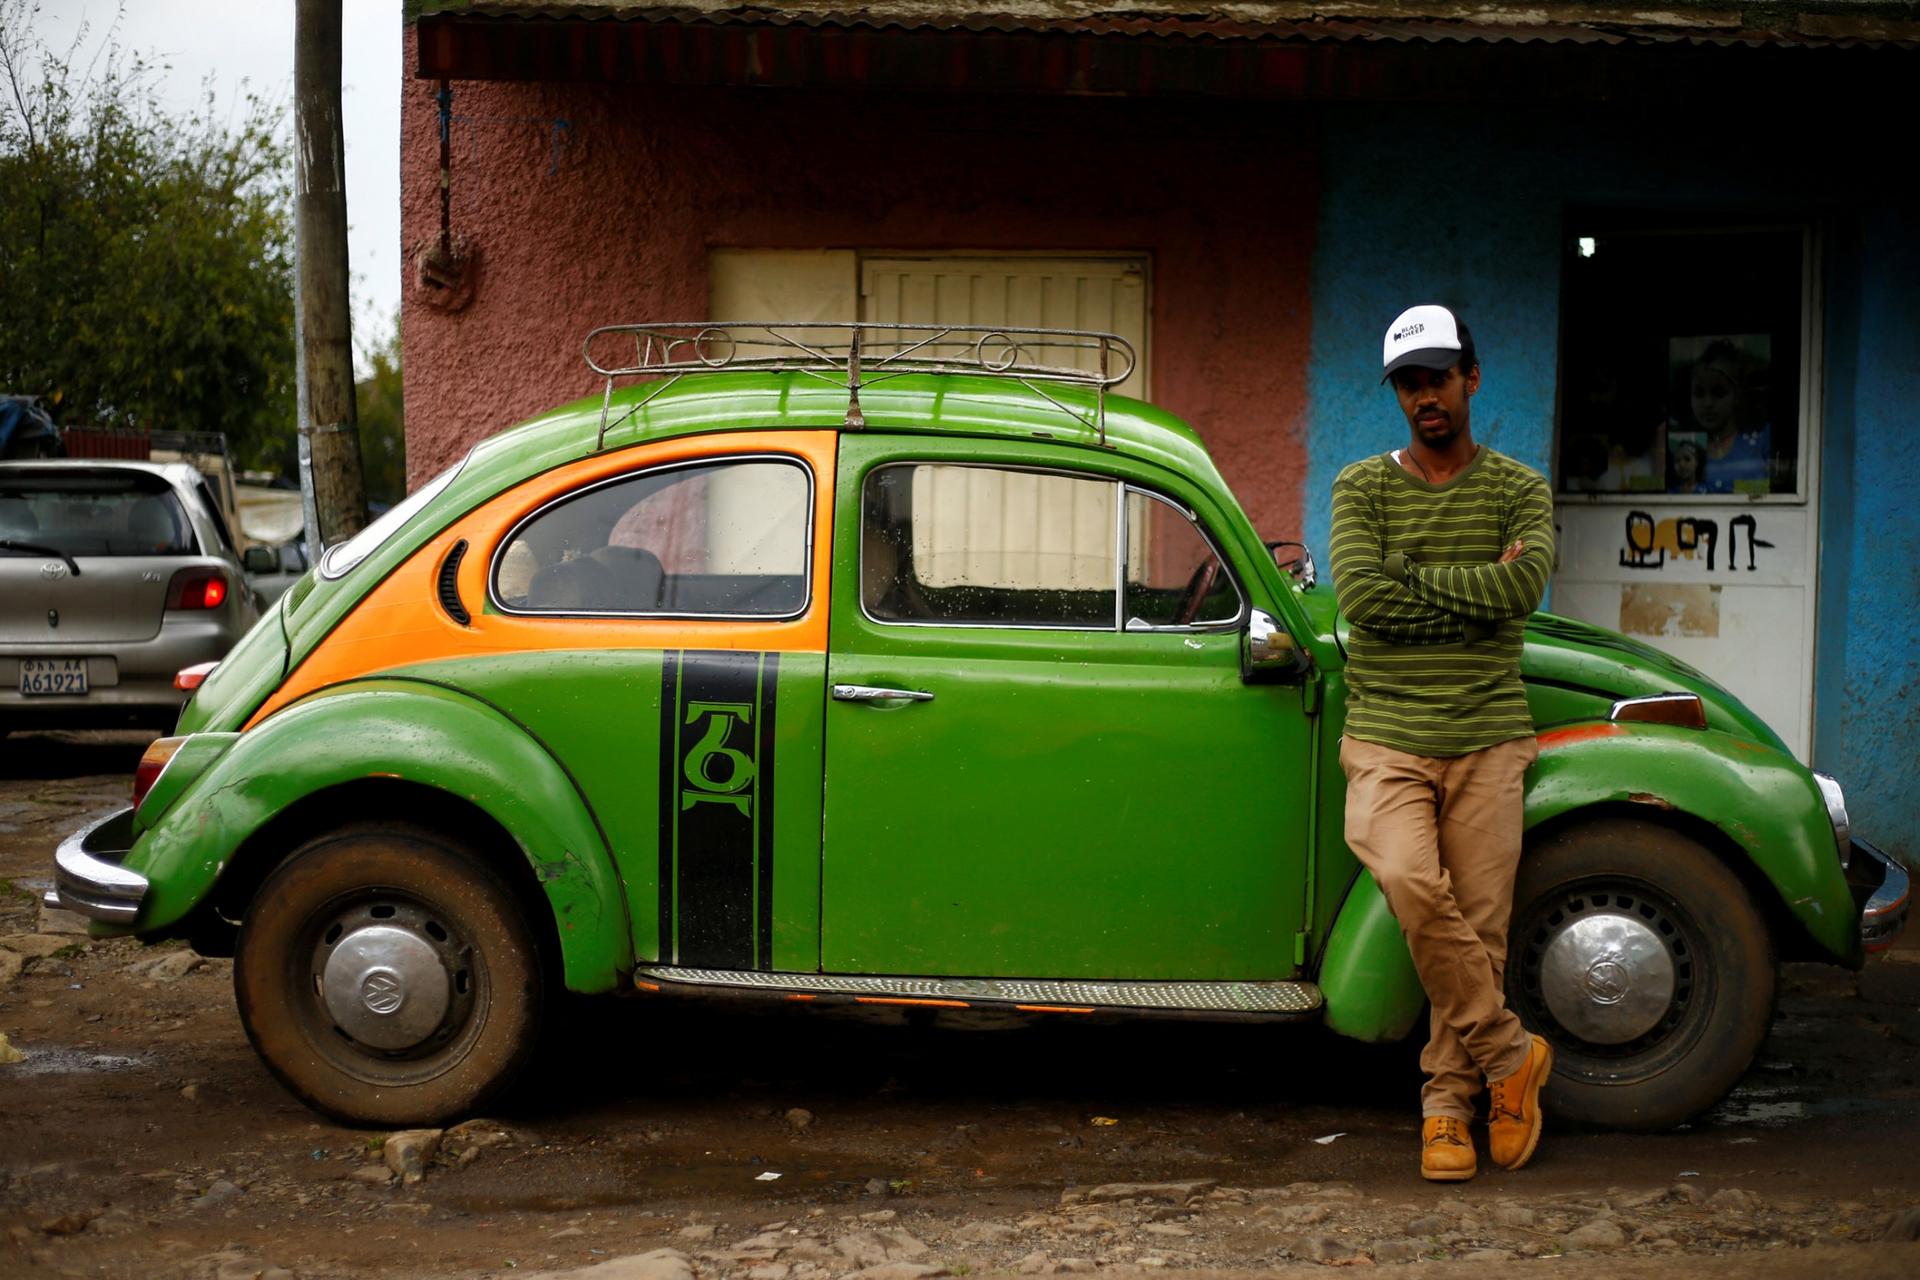 A man in a stripped shirt and hat is shown standing next to a green 1976 model Volkswagen Beetle.